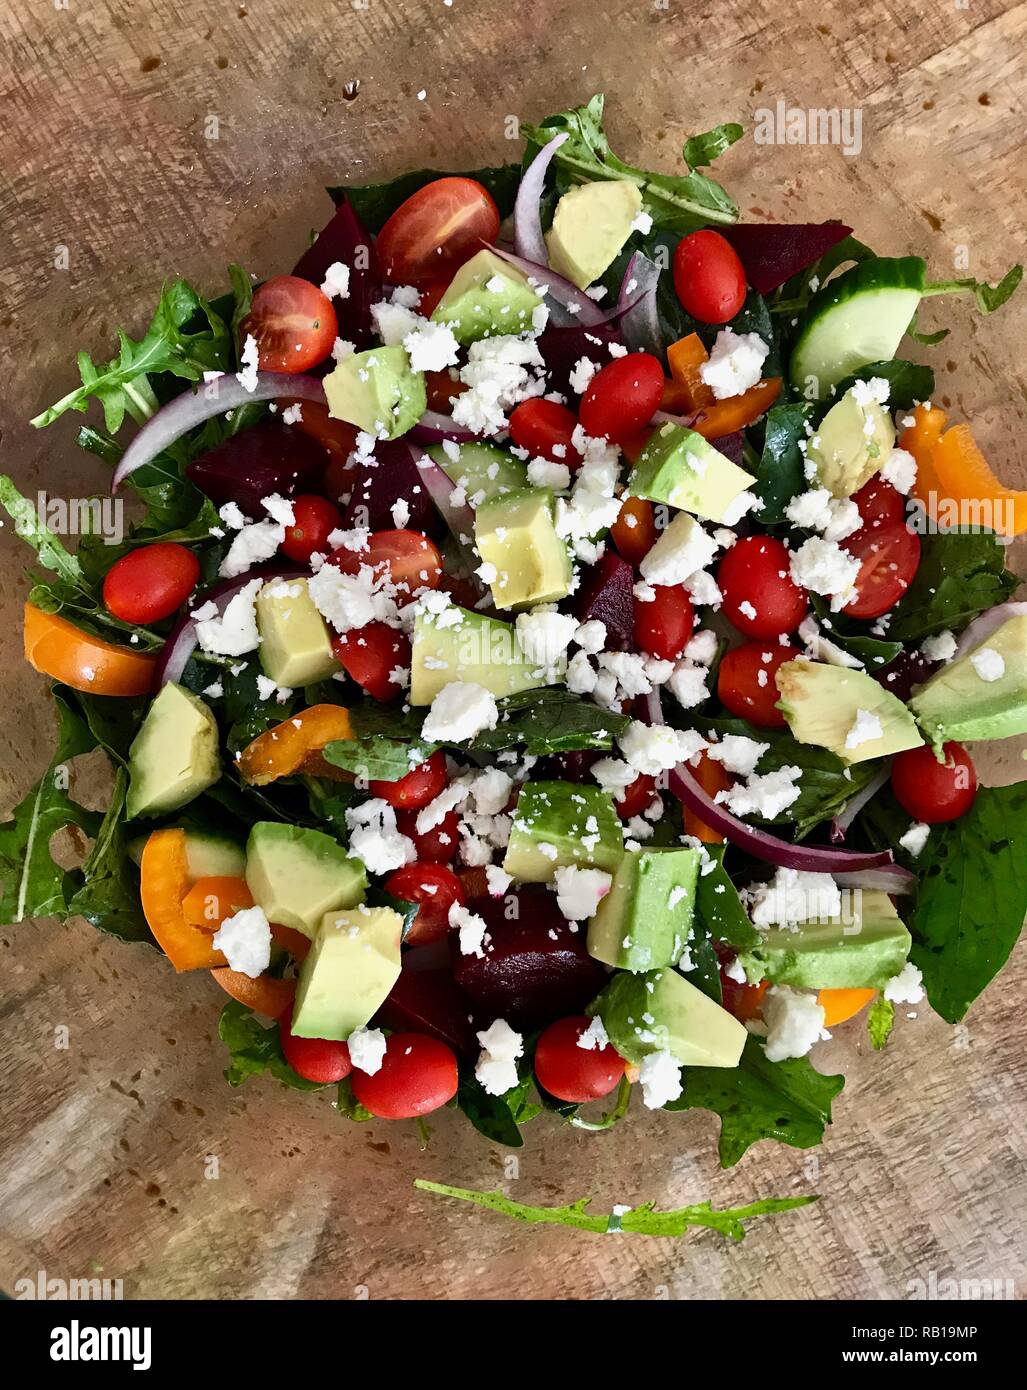 A whole foods healthy big salad full of colour Stock Photo